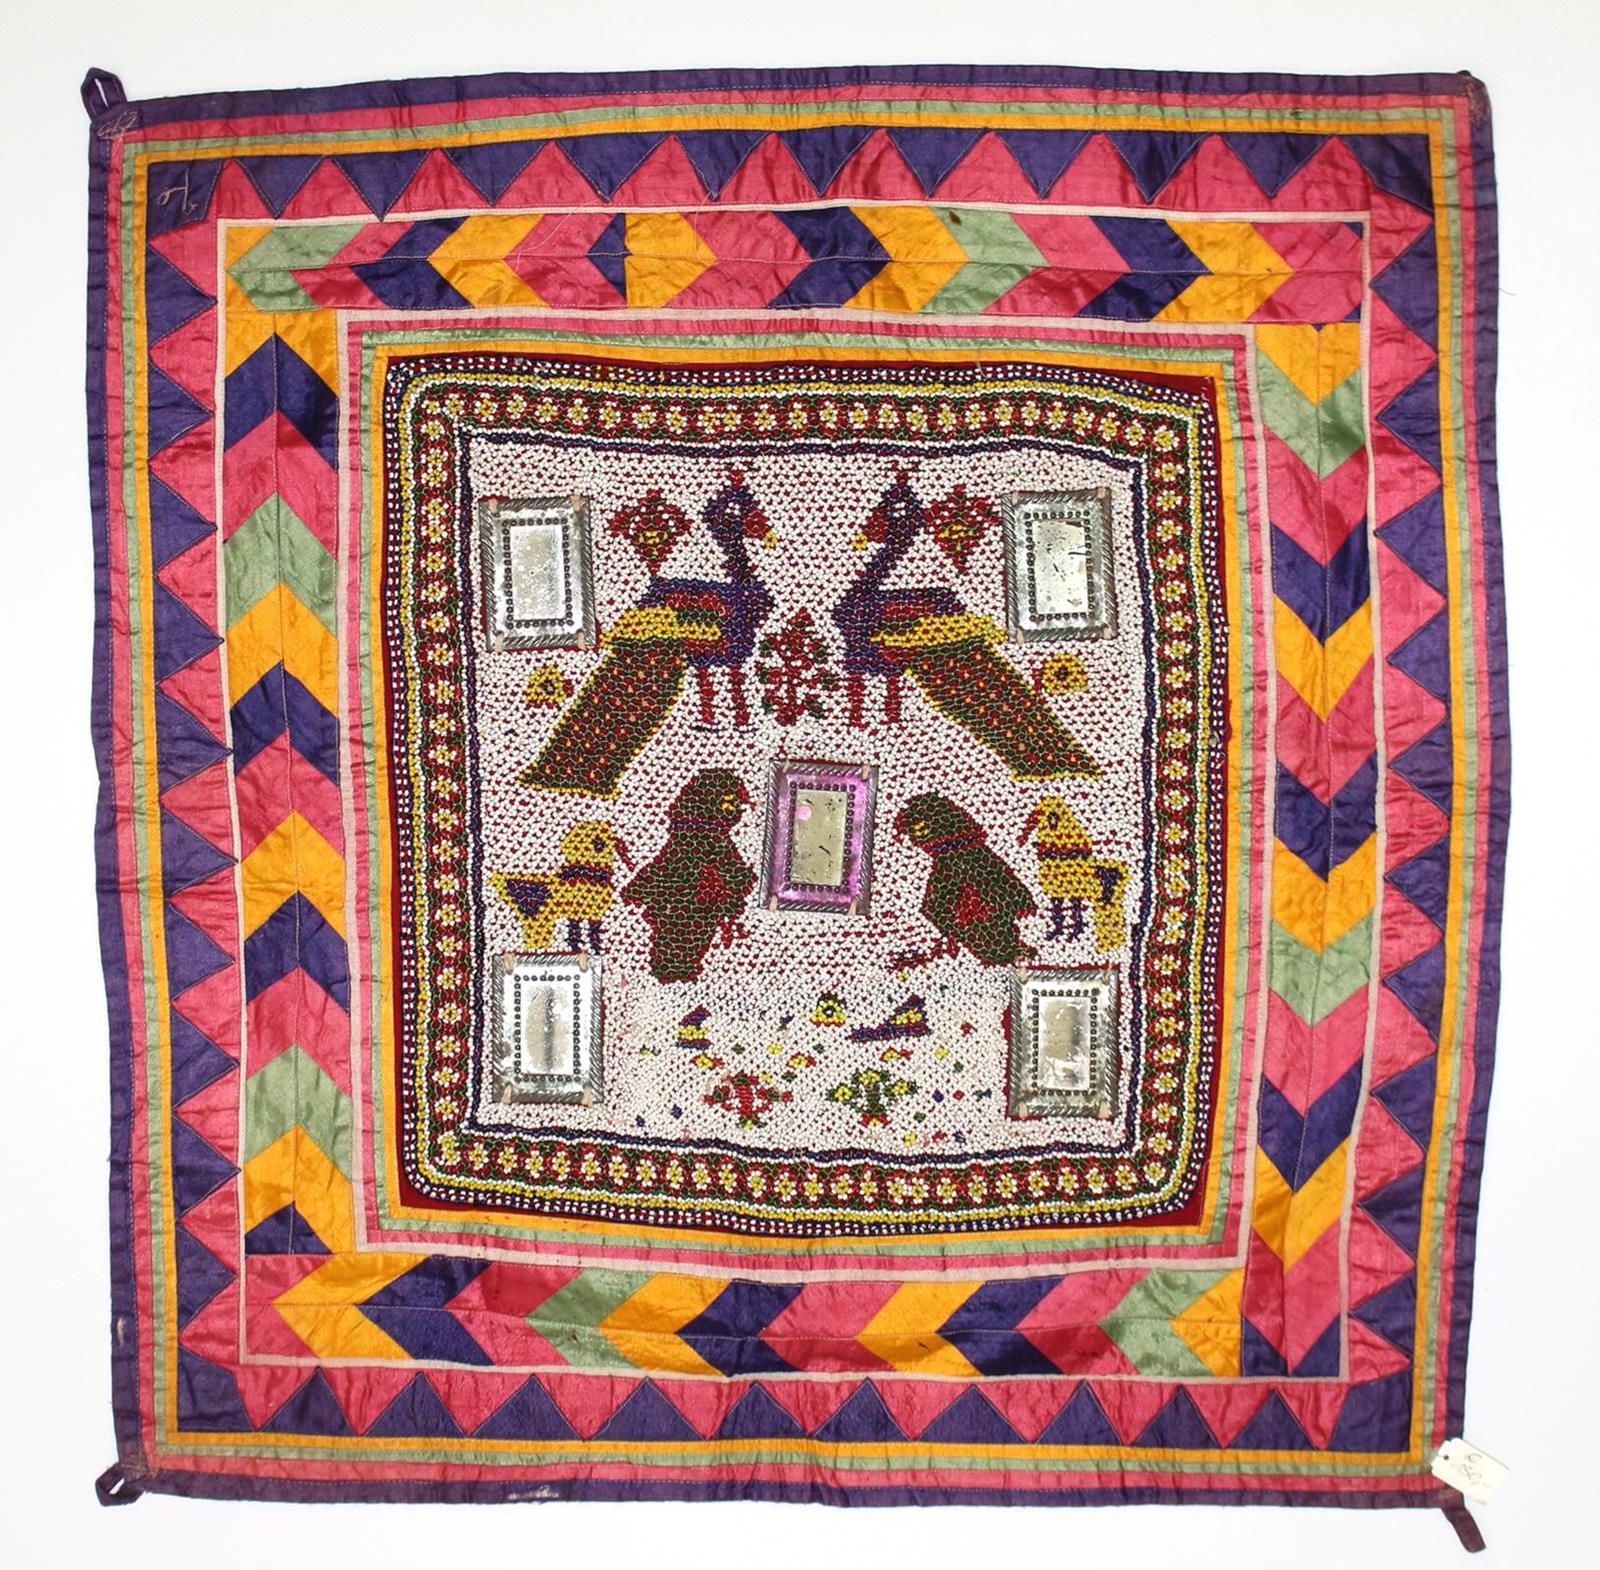 Rajasthan Indien Decken u. Hangings. Hand embroidered wall hangings and cloths w&hellip;